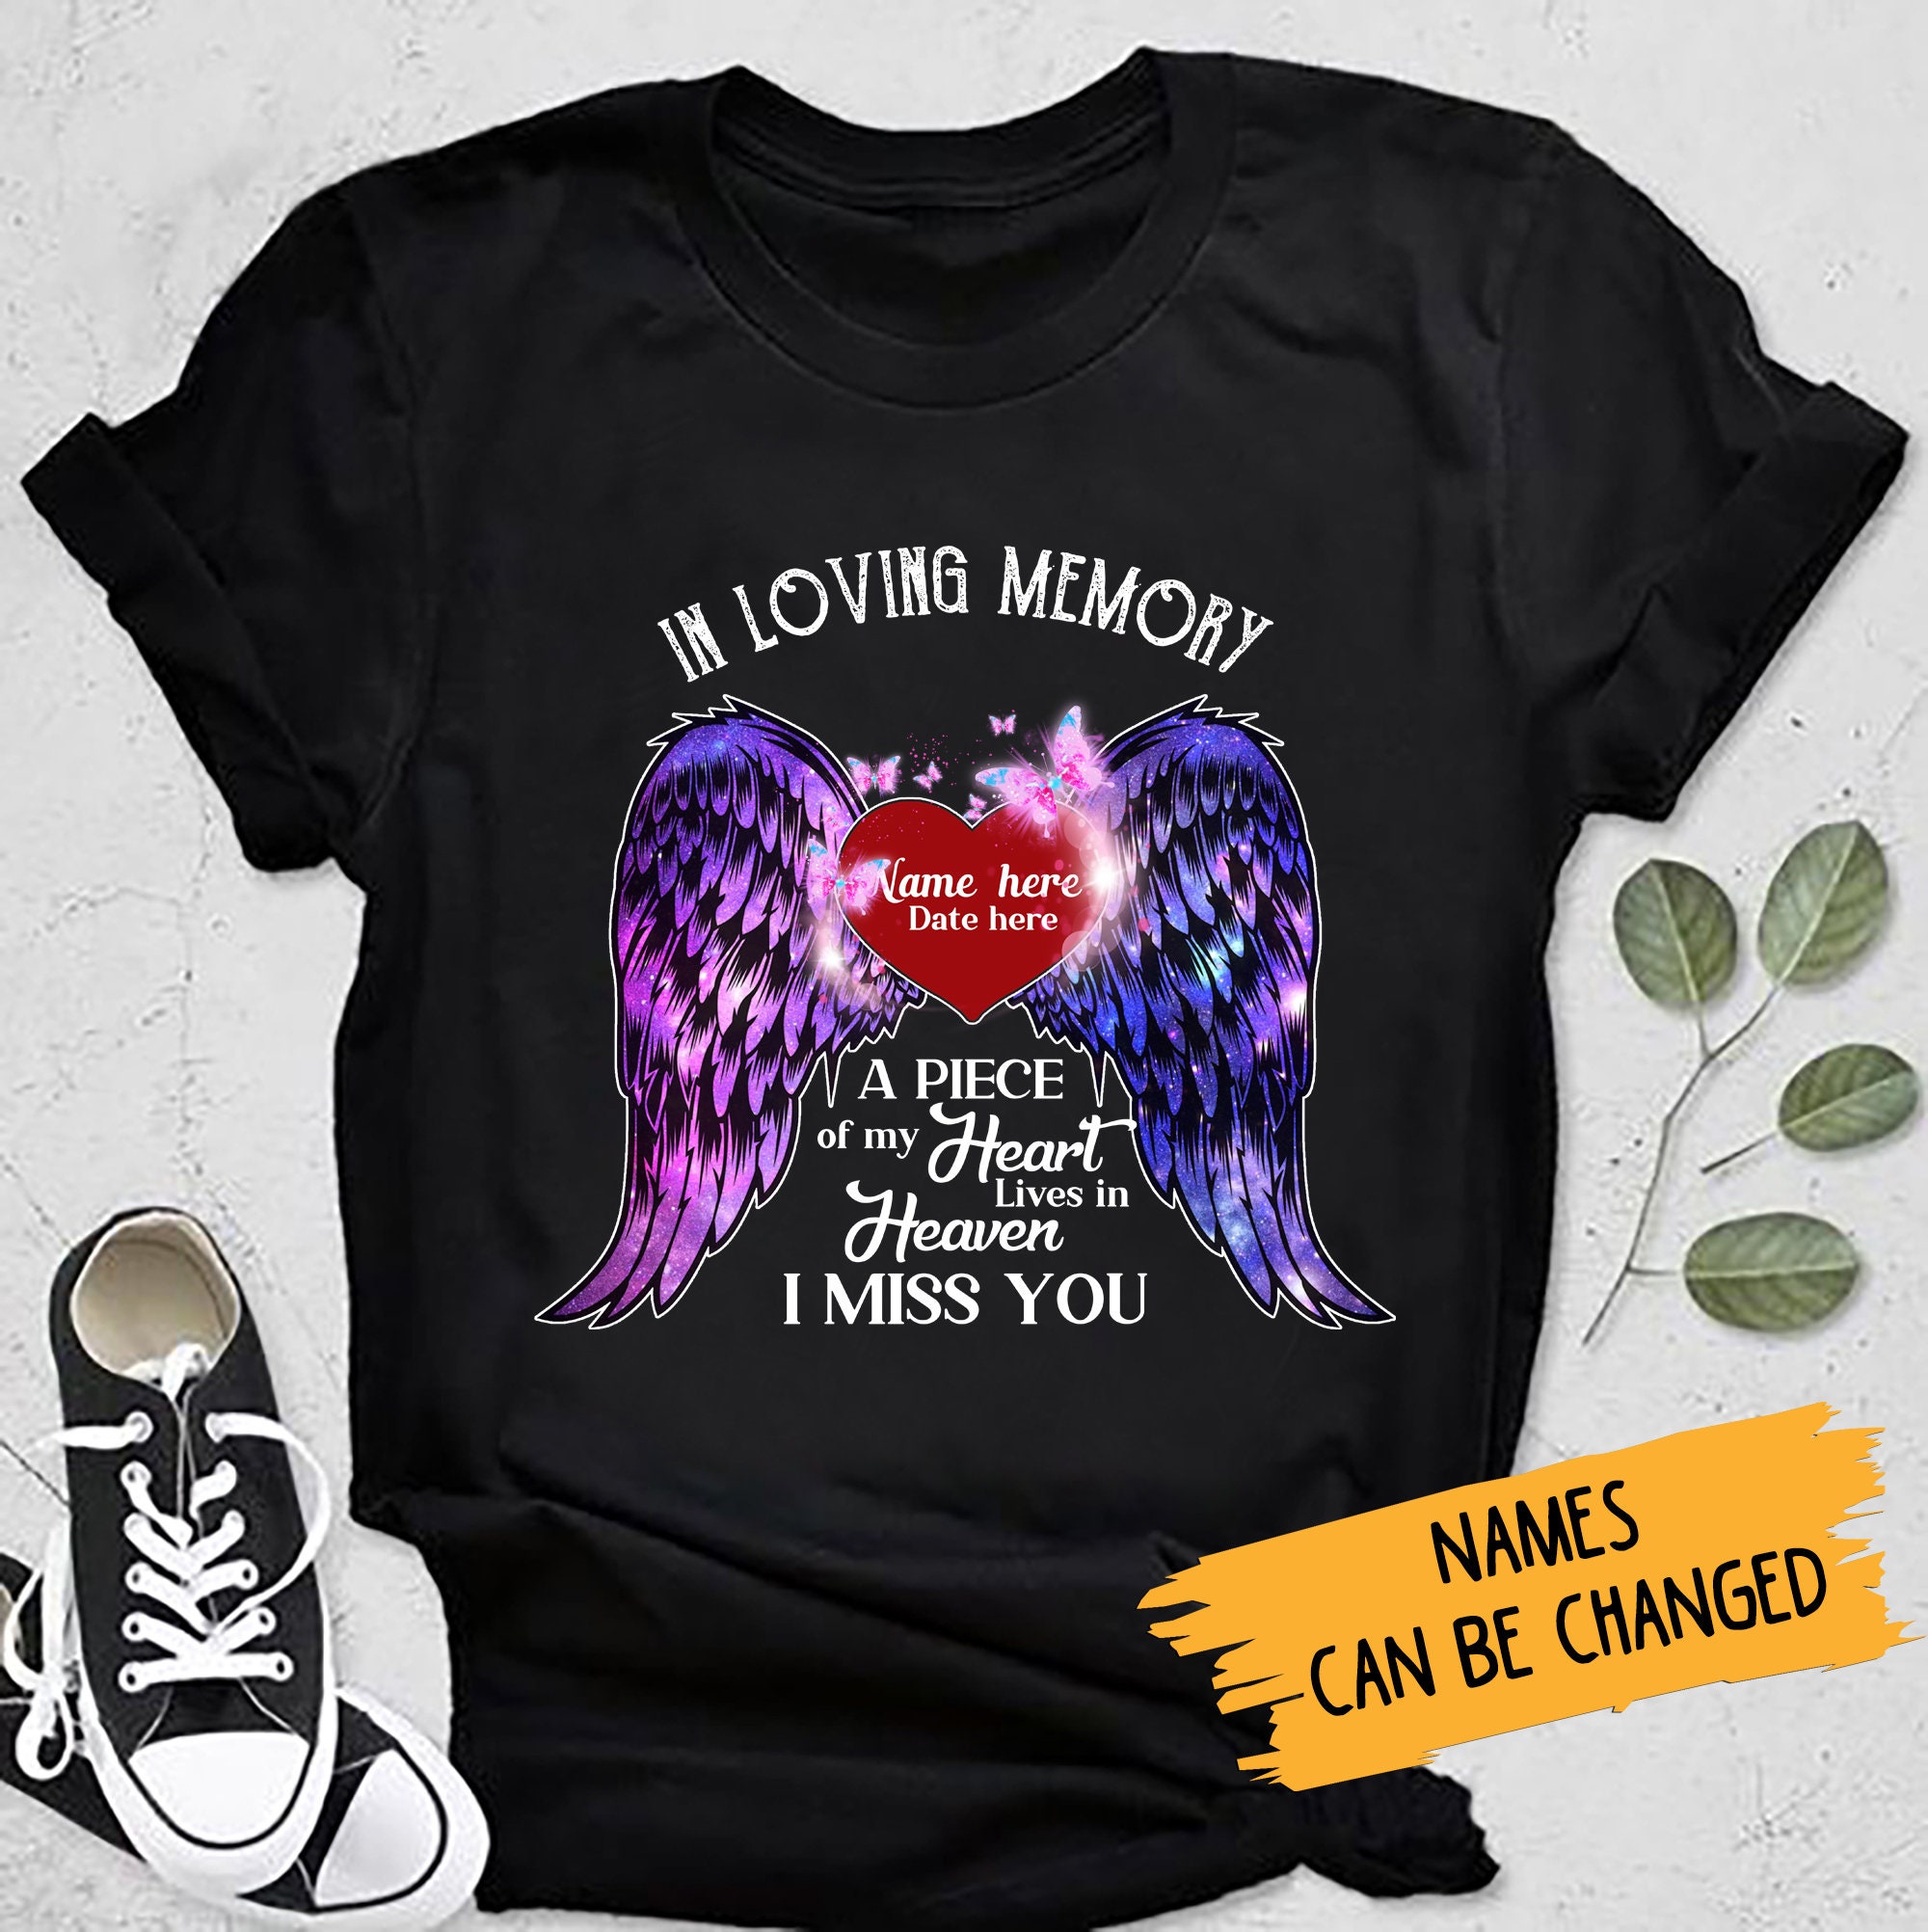 DH Angel Wings In Loving Memory Shirt Personalized Shirt A | Etsy